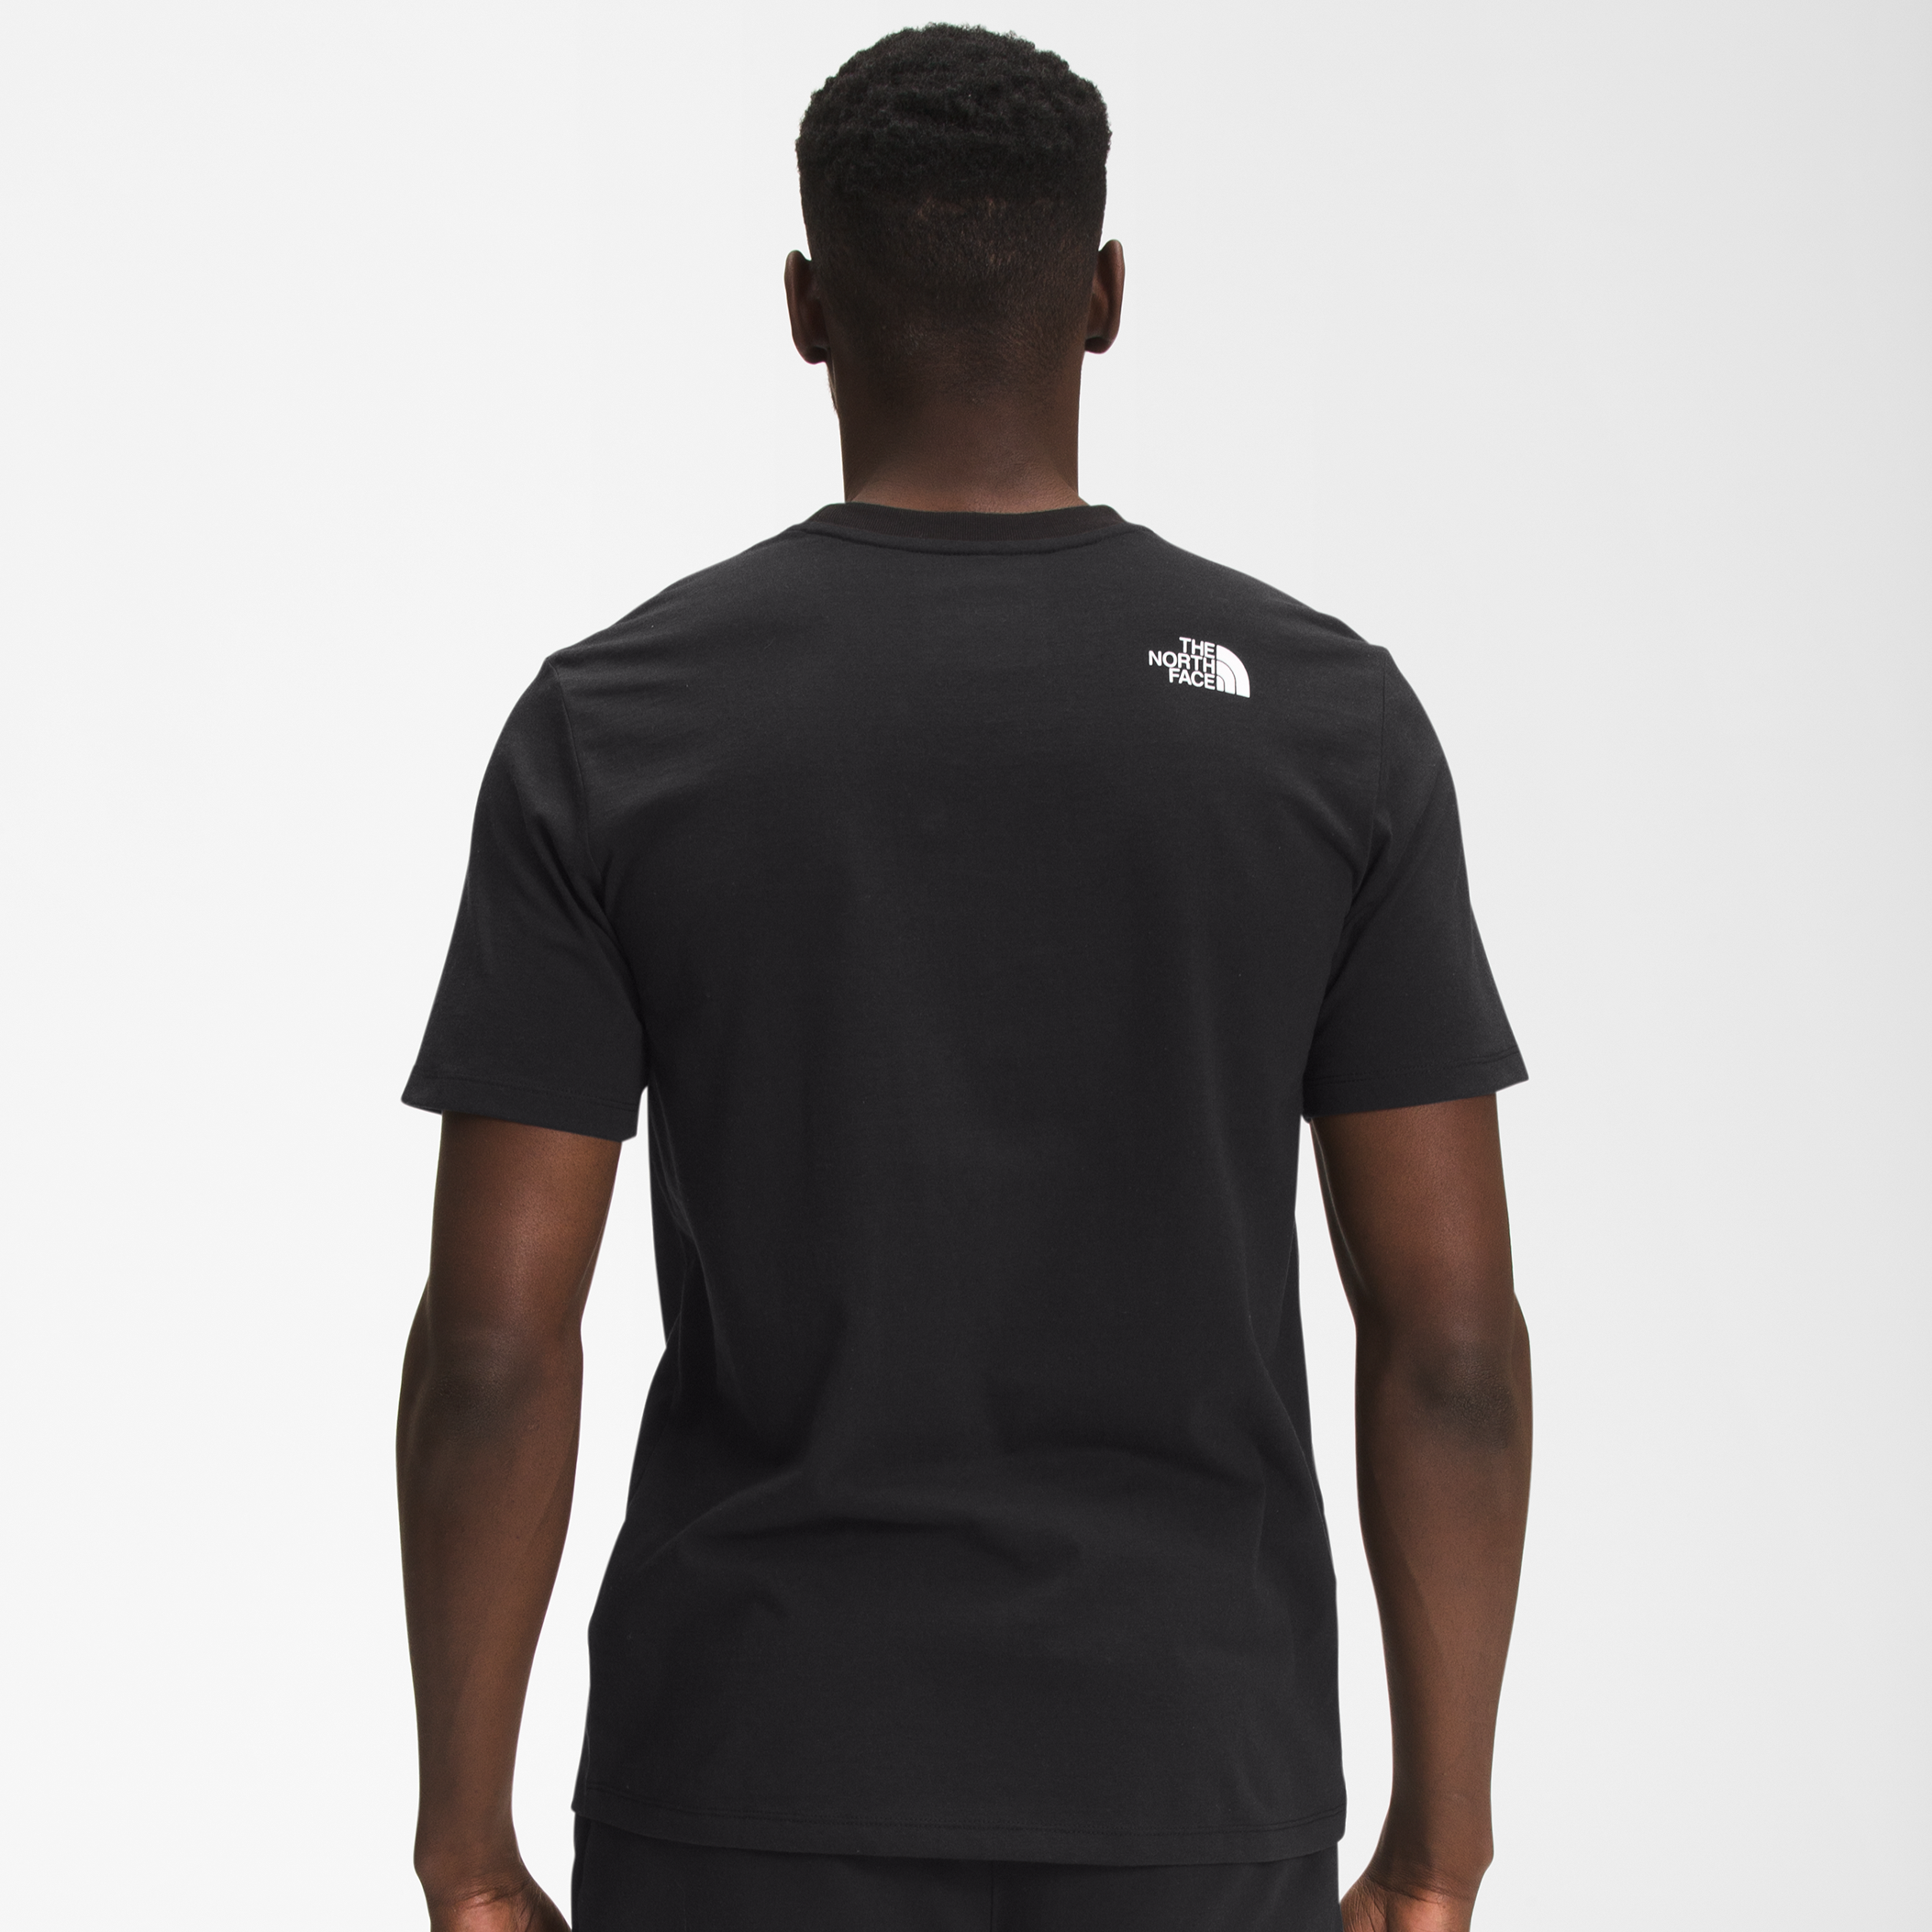 THE NORTH FACE COORDINATE TEE